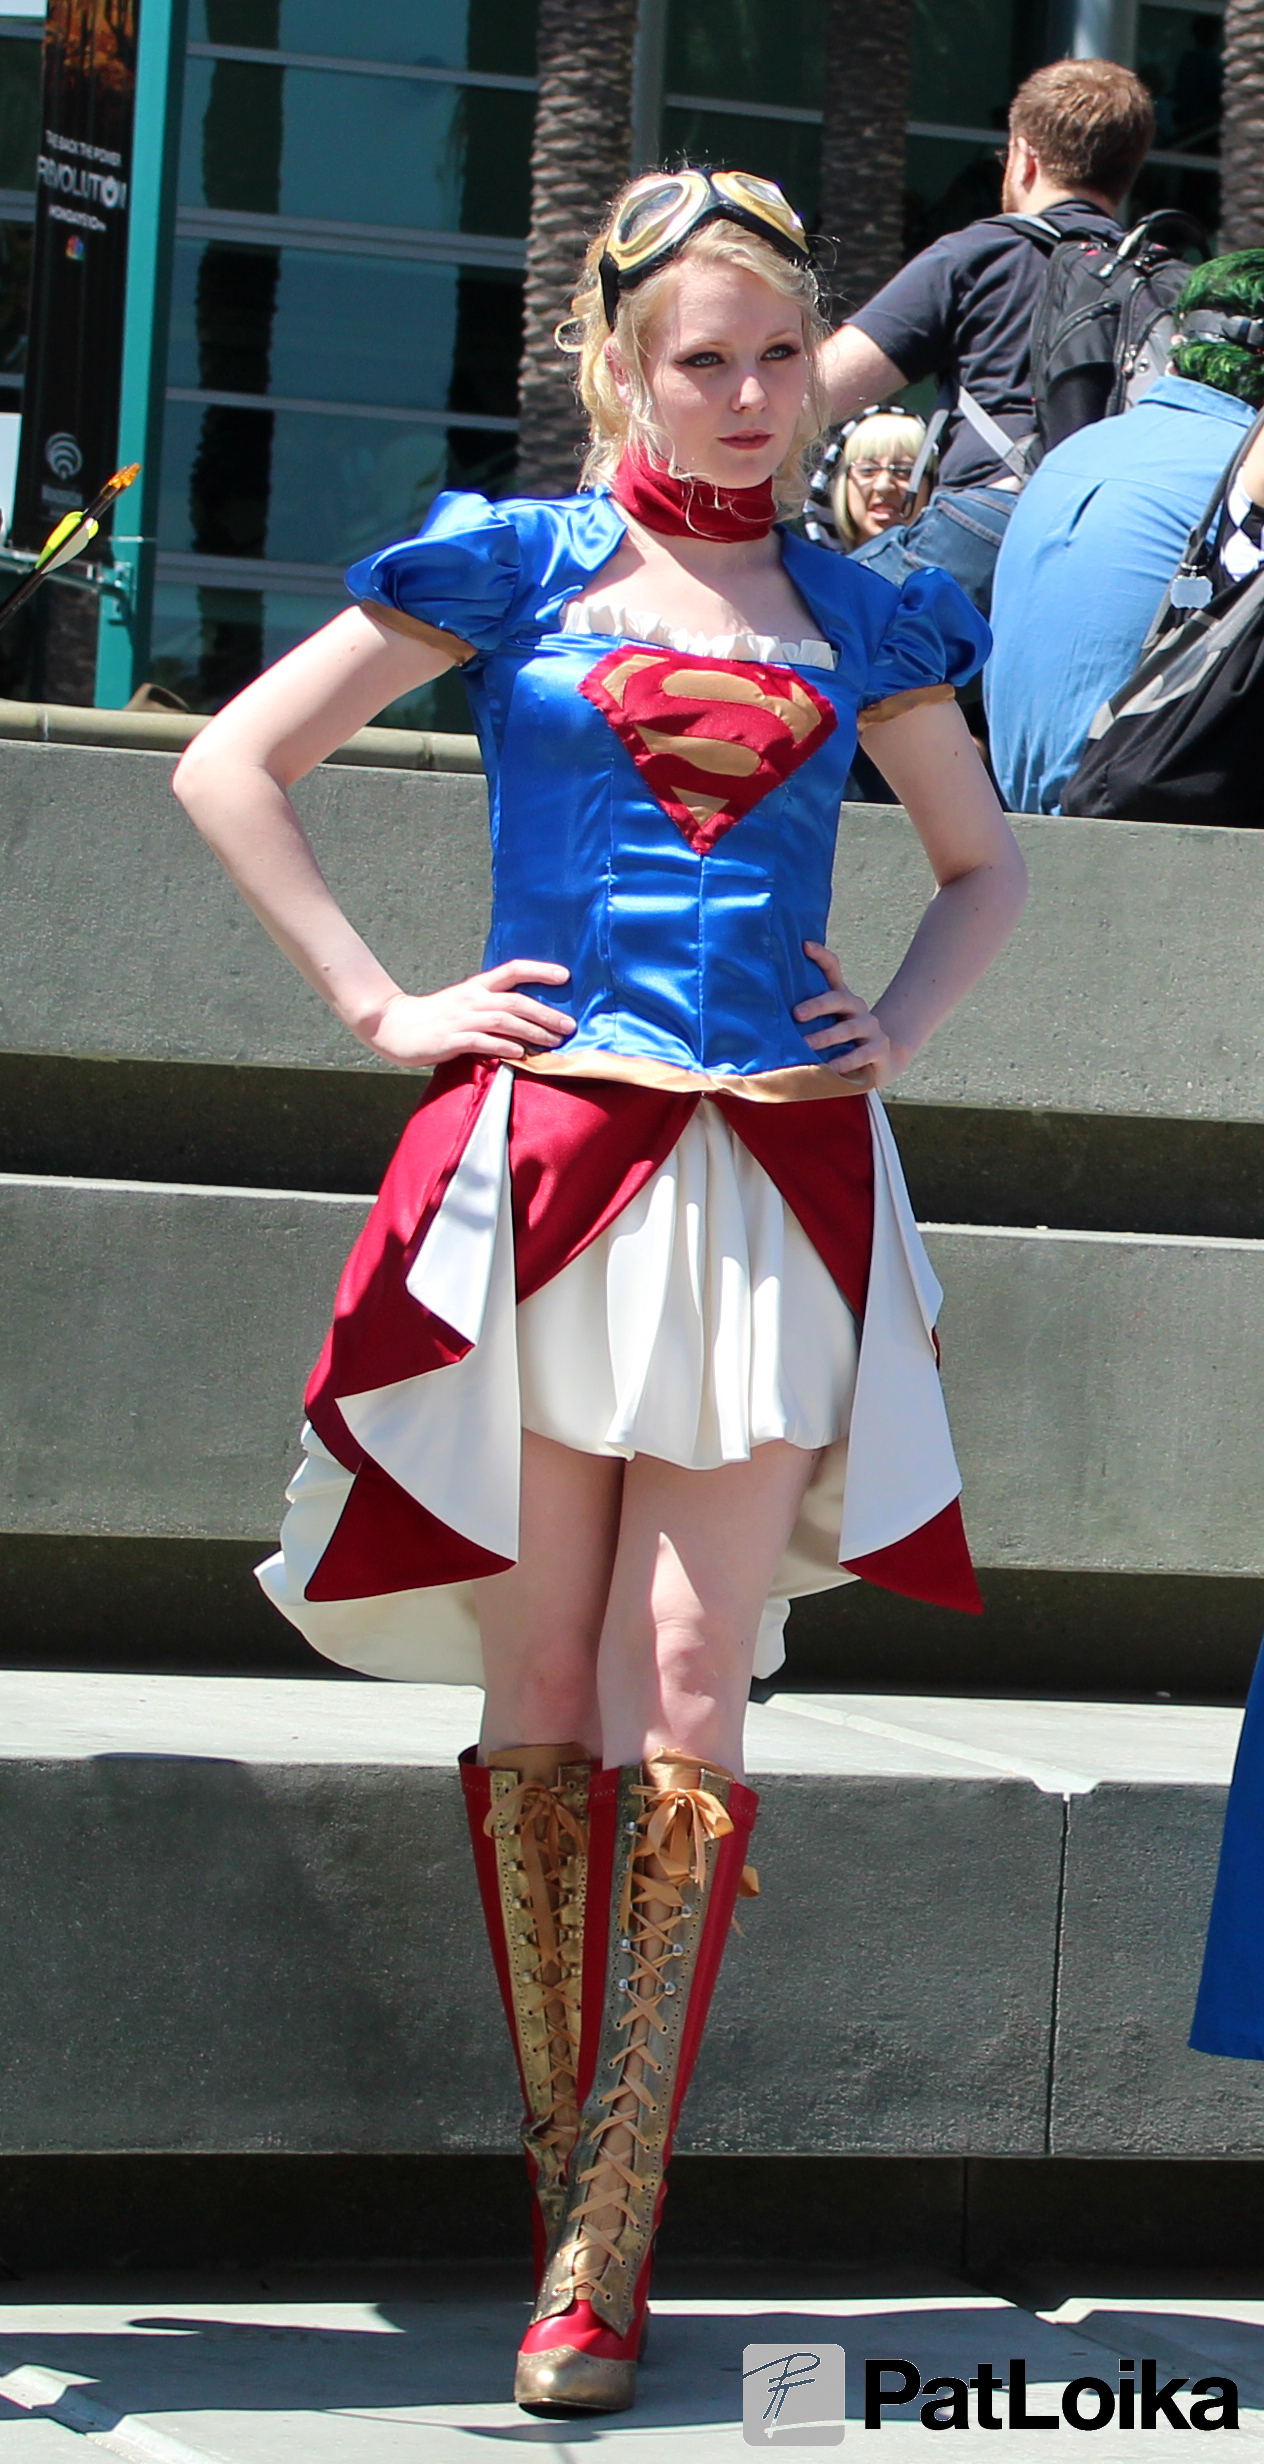 the woman is dressed up in a supergirl costume